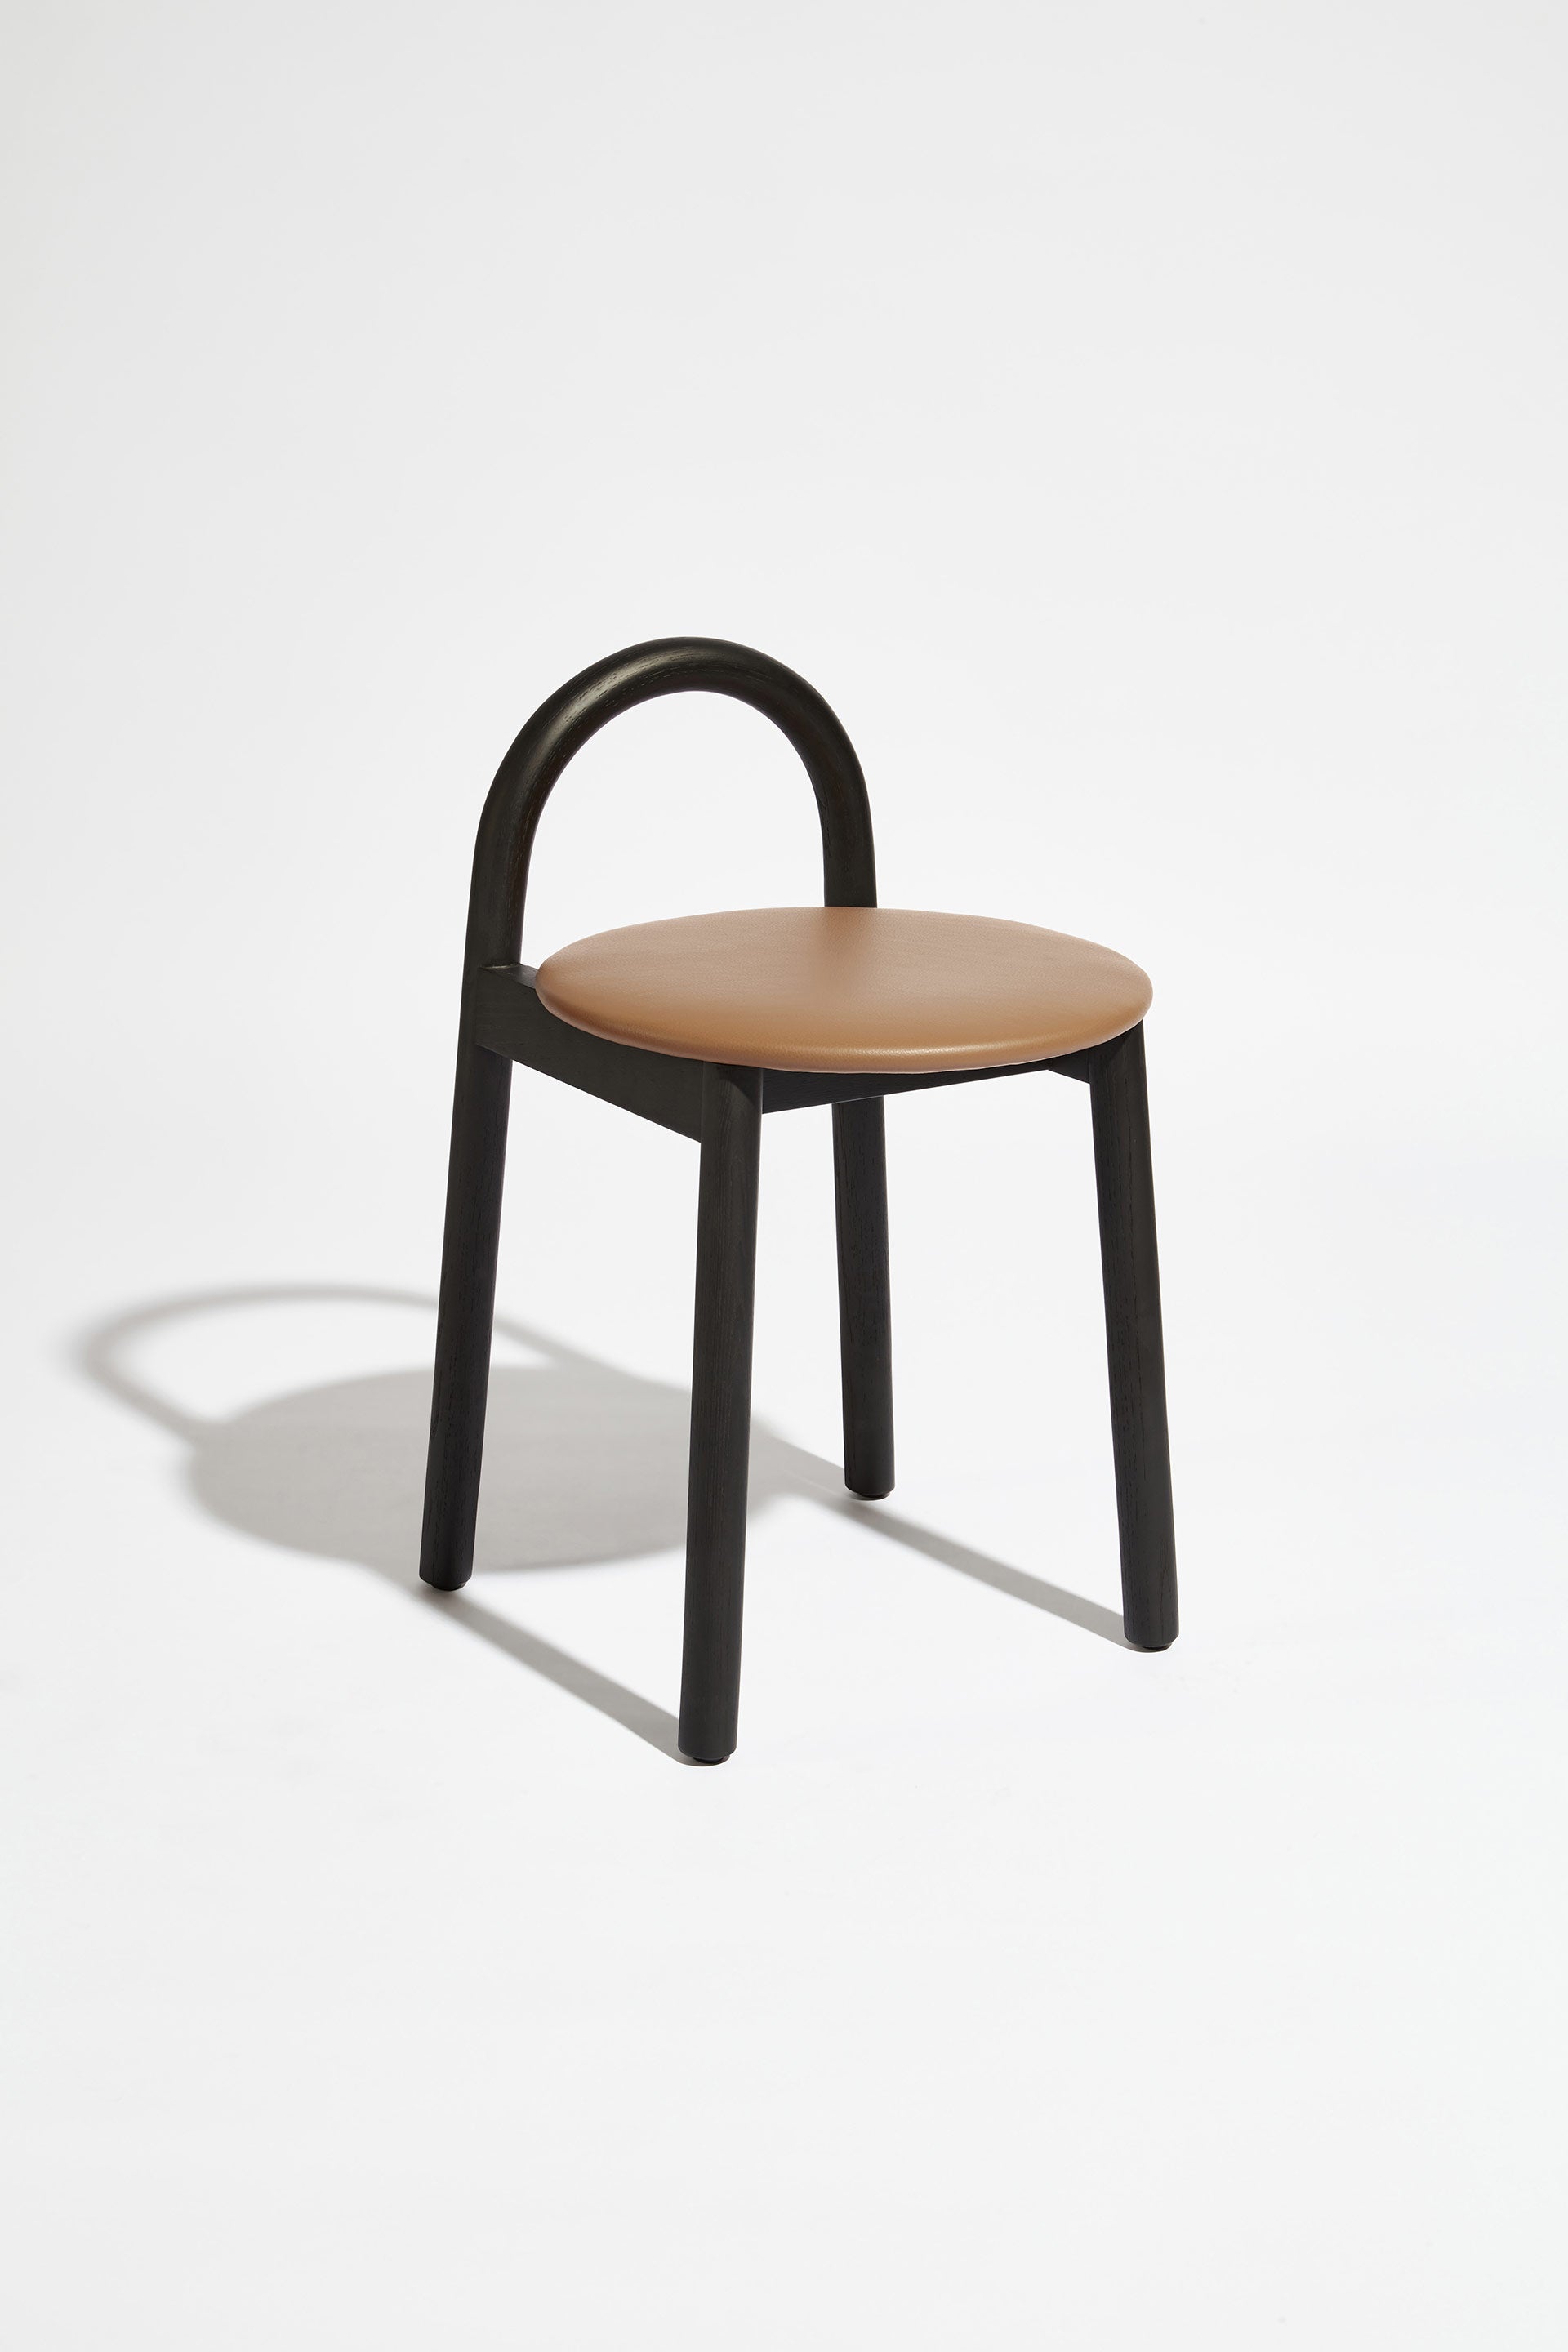 Bobby Timber Low Stool with leather seat pad | DesignByThem **  HF2 Maharam Lariat (Vinyl) 001 Camel / Black Stained Ash